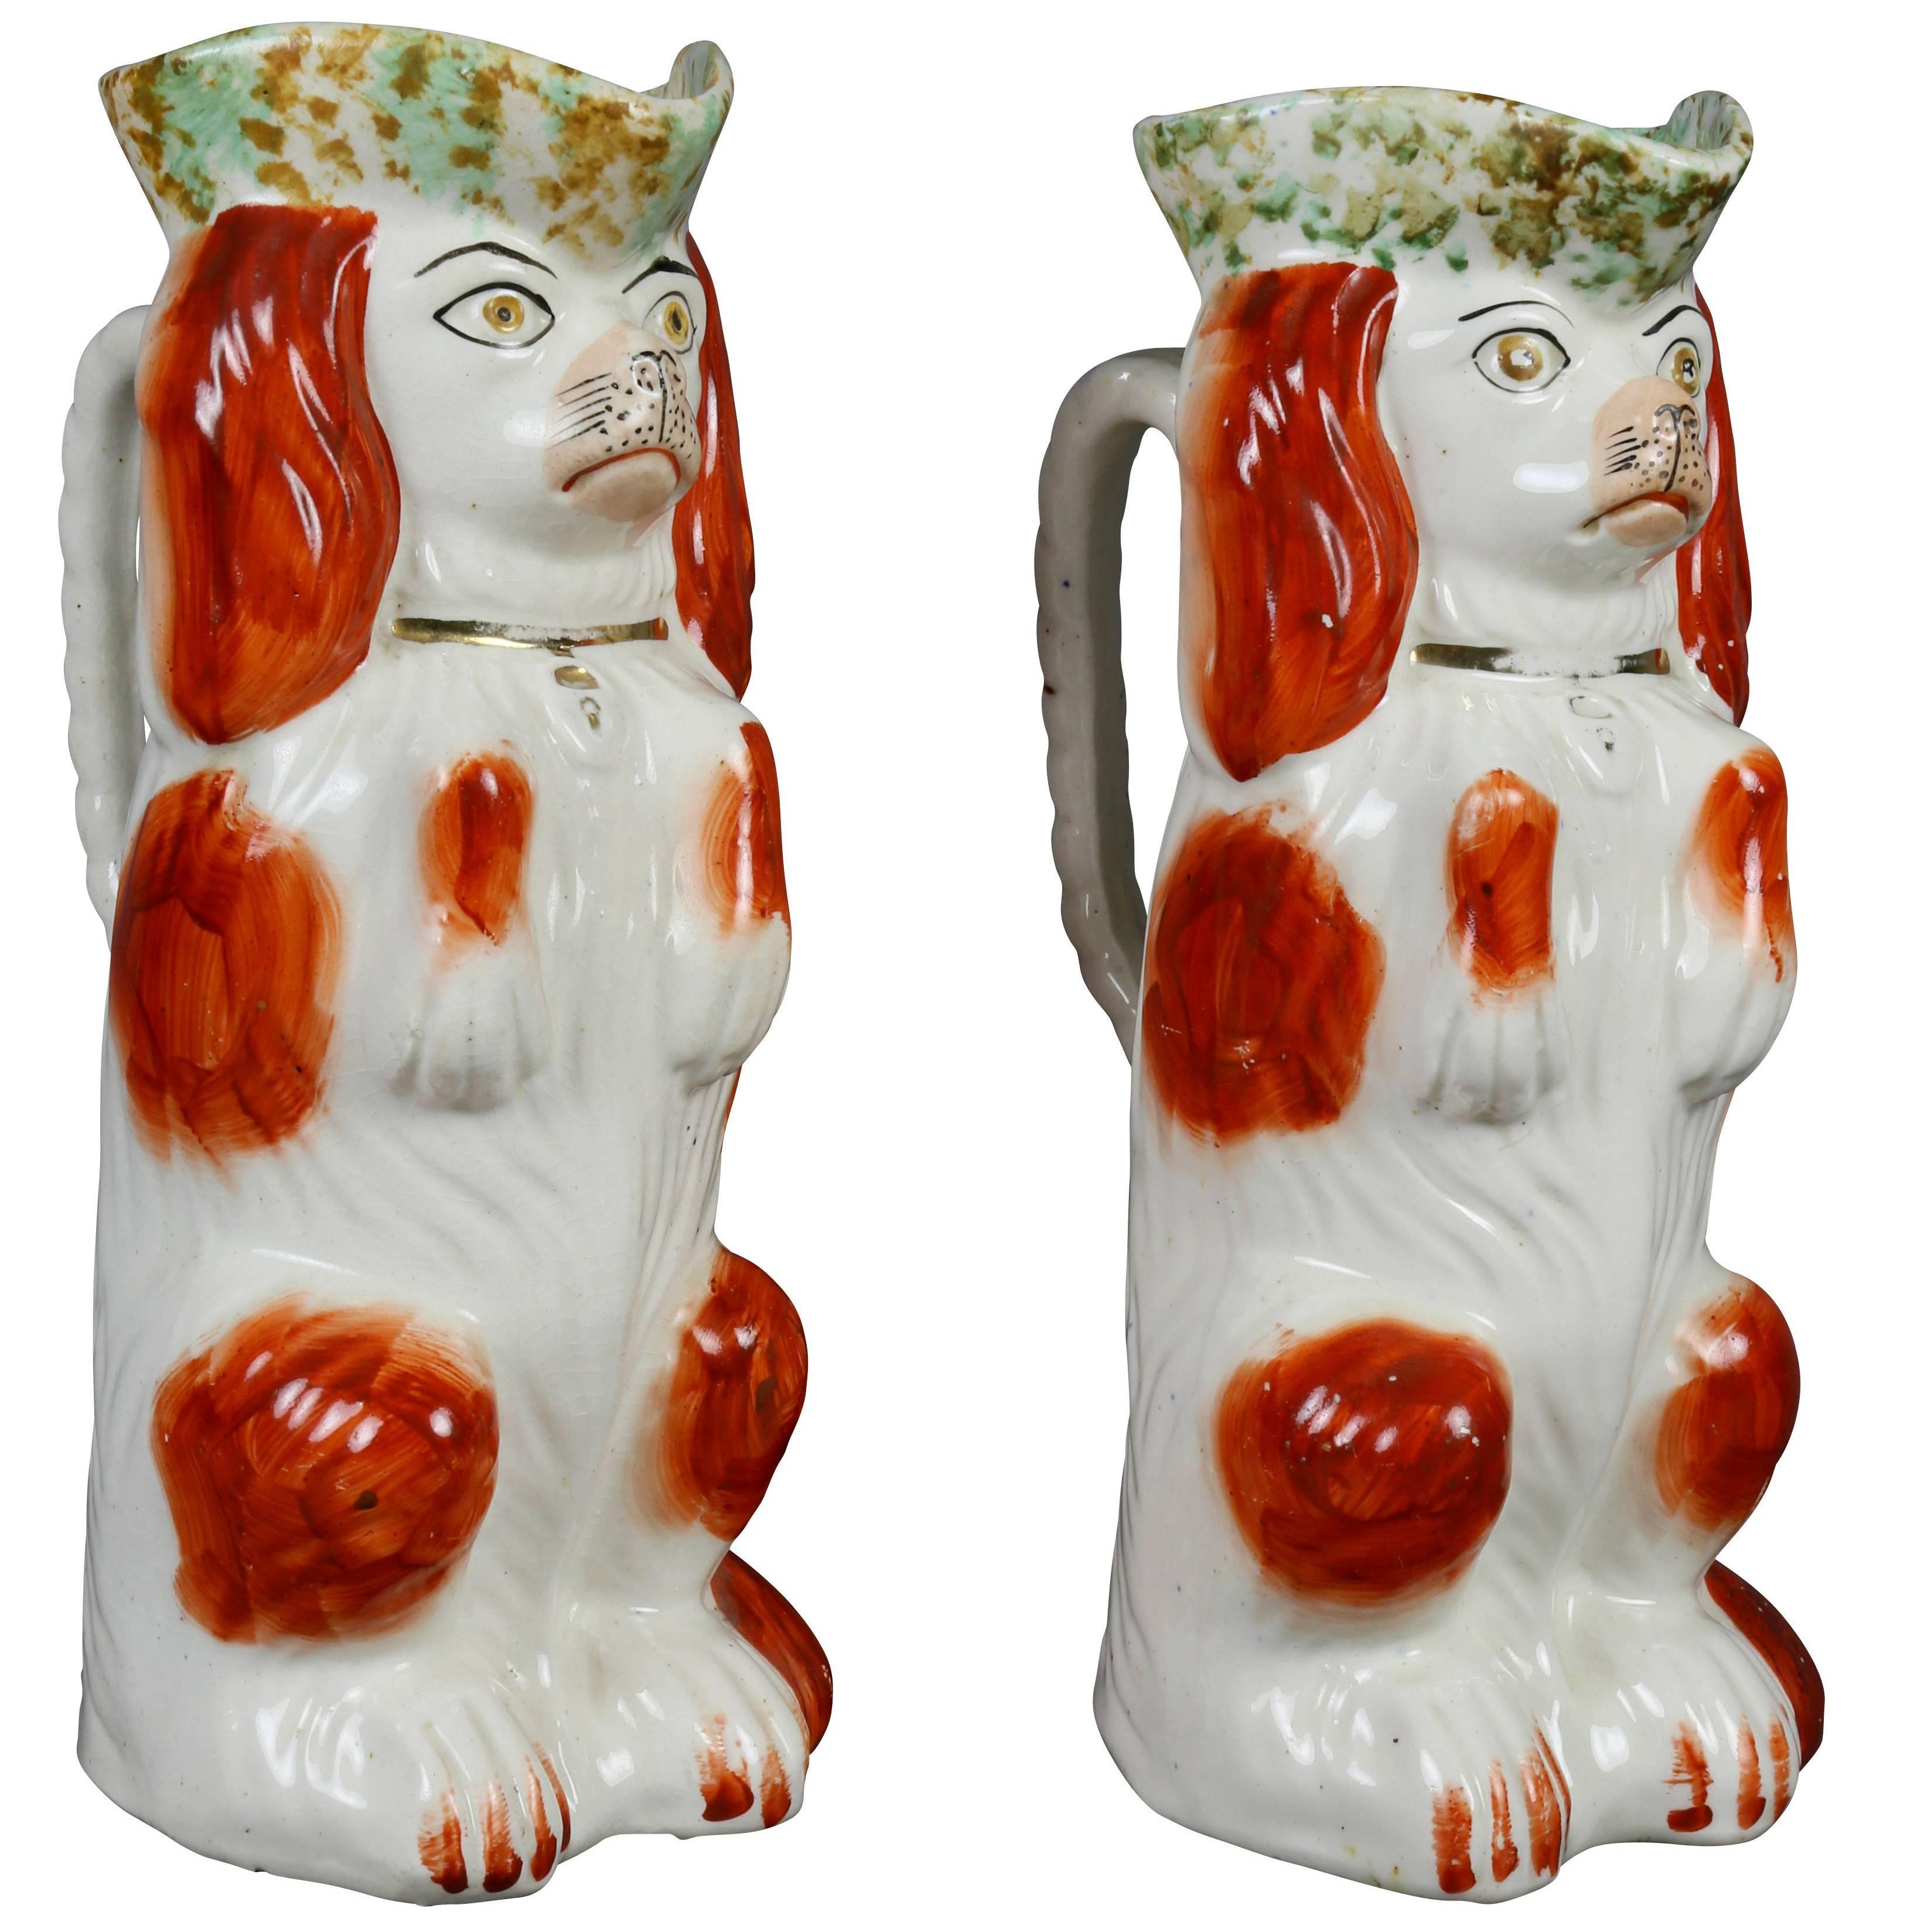 Pair of Staffordshire Spaniel Form Toby Jugs